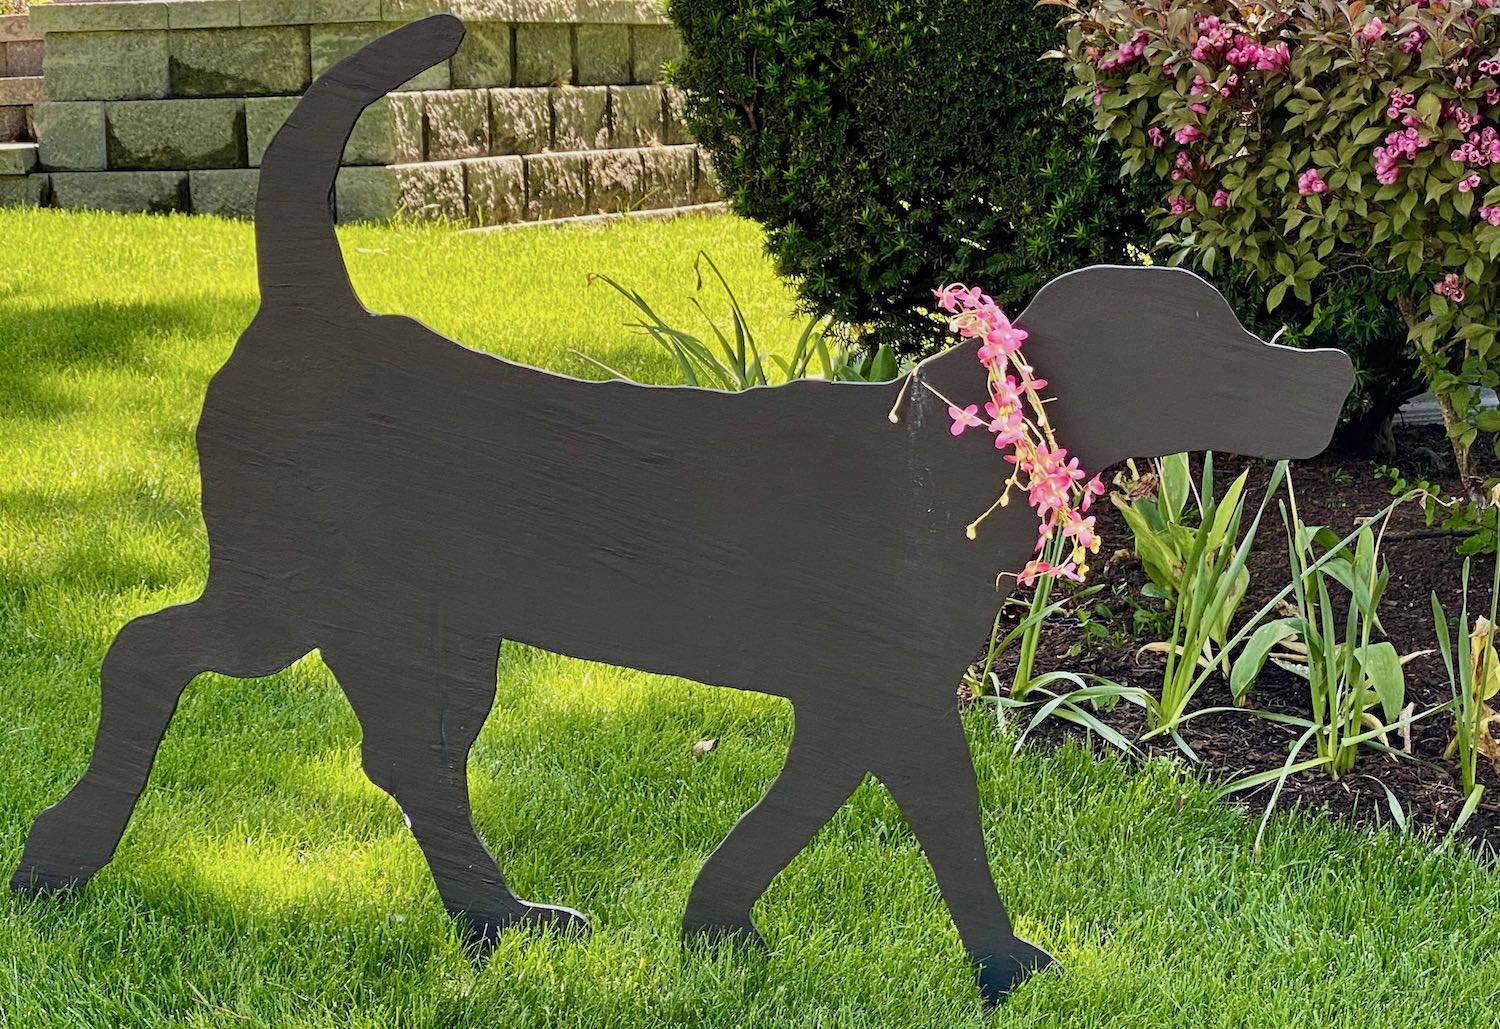 It's the weekend! Number 299, Black Dog Lawn Decoration with Floral Wreath